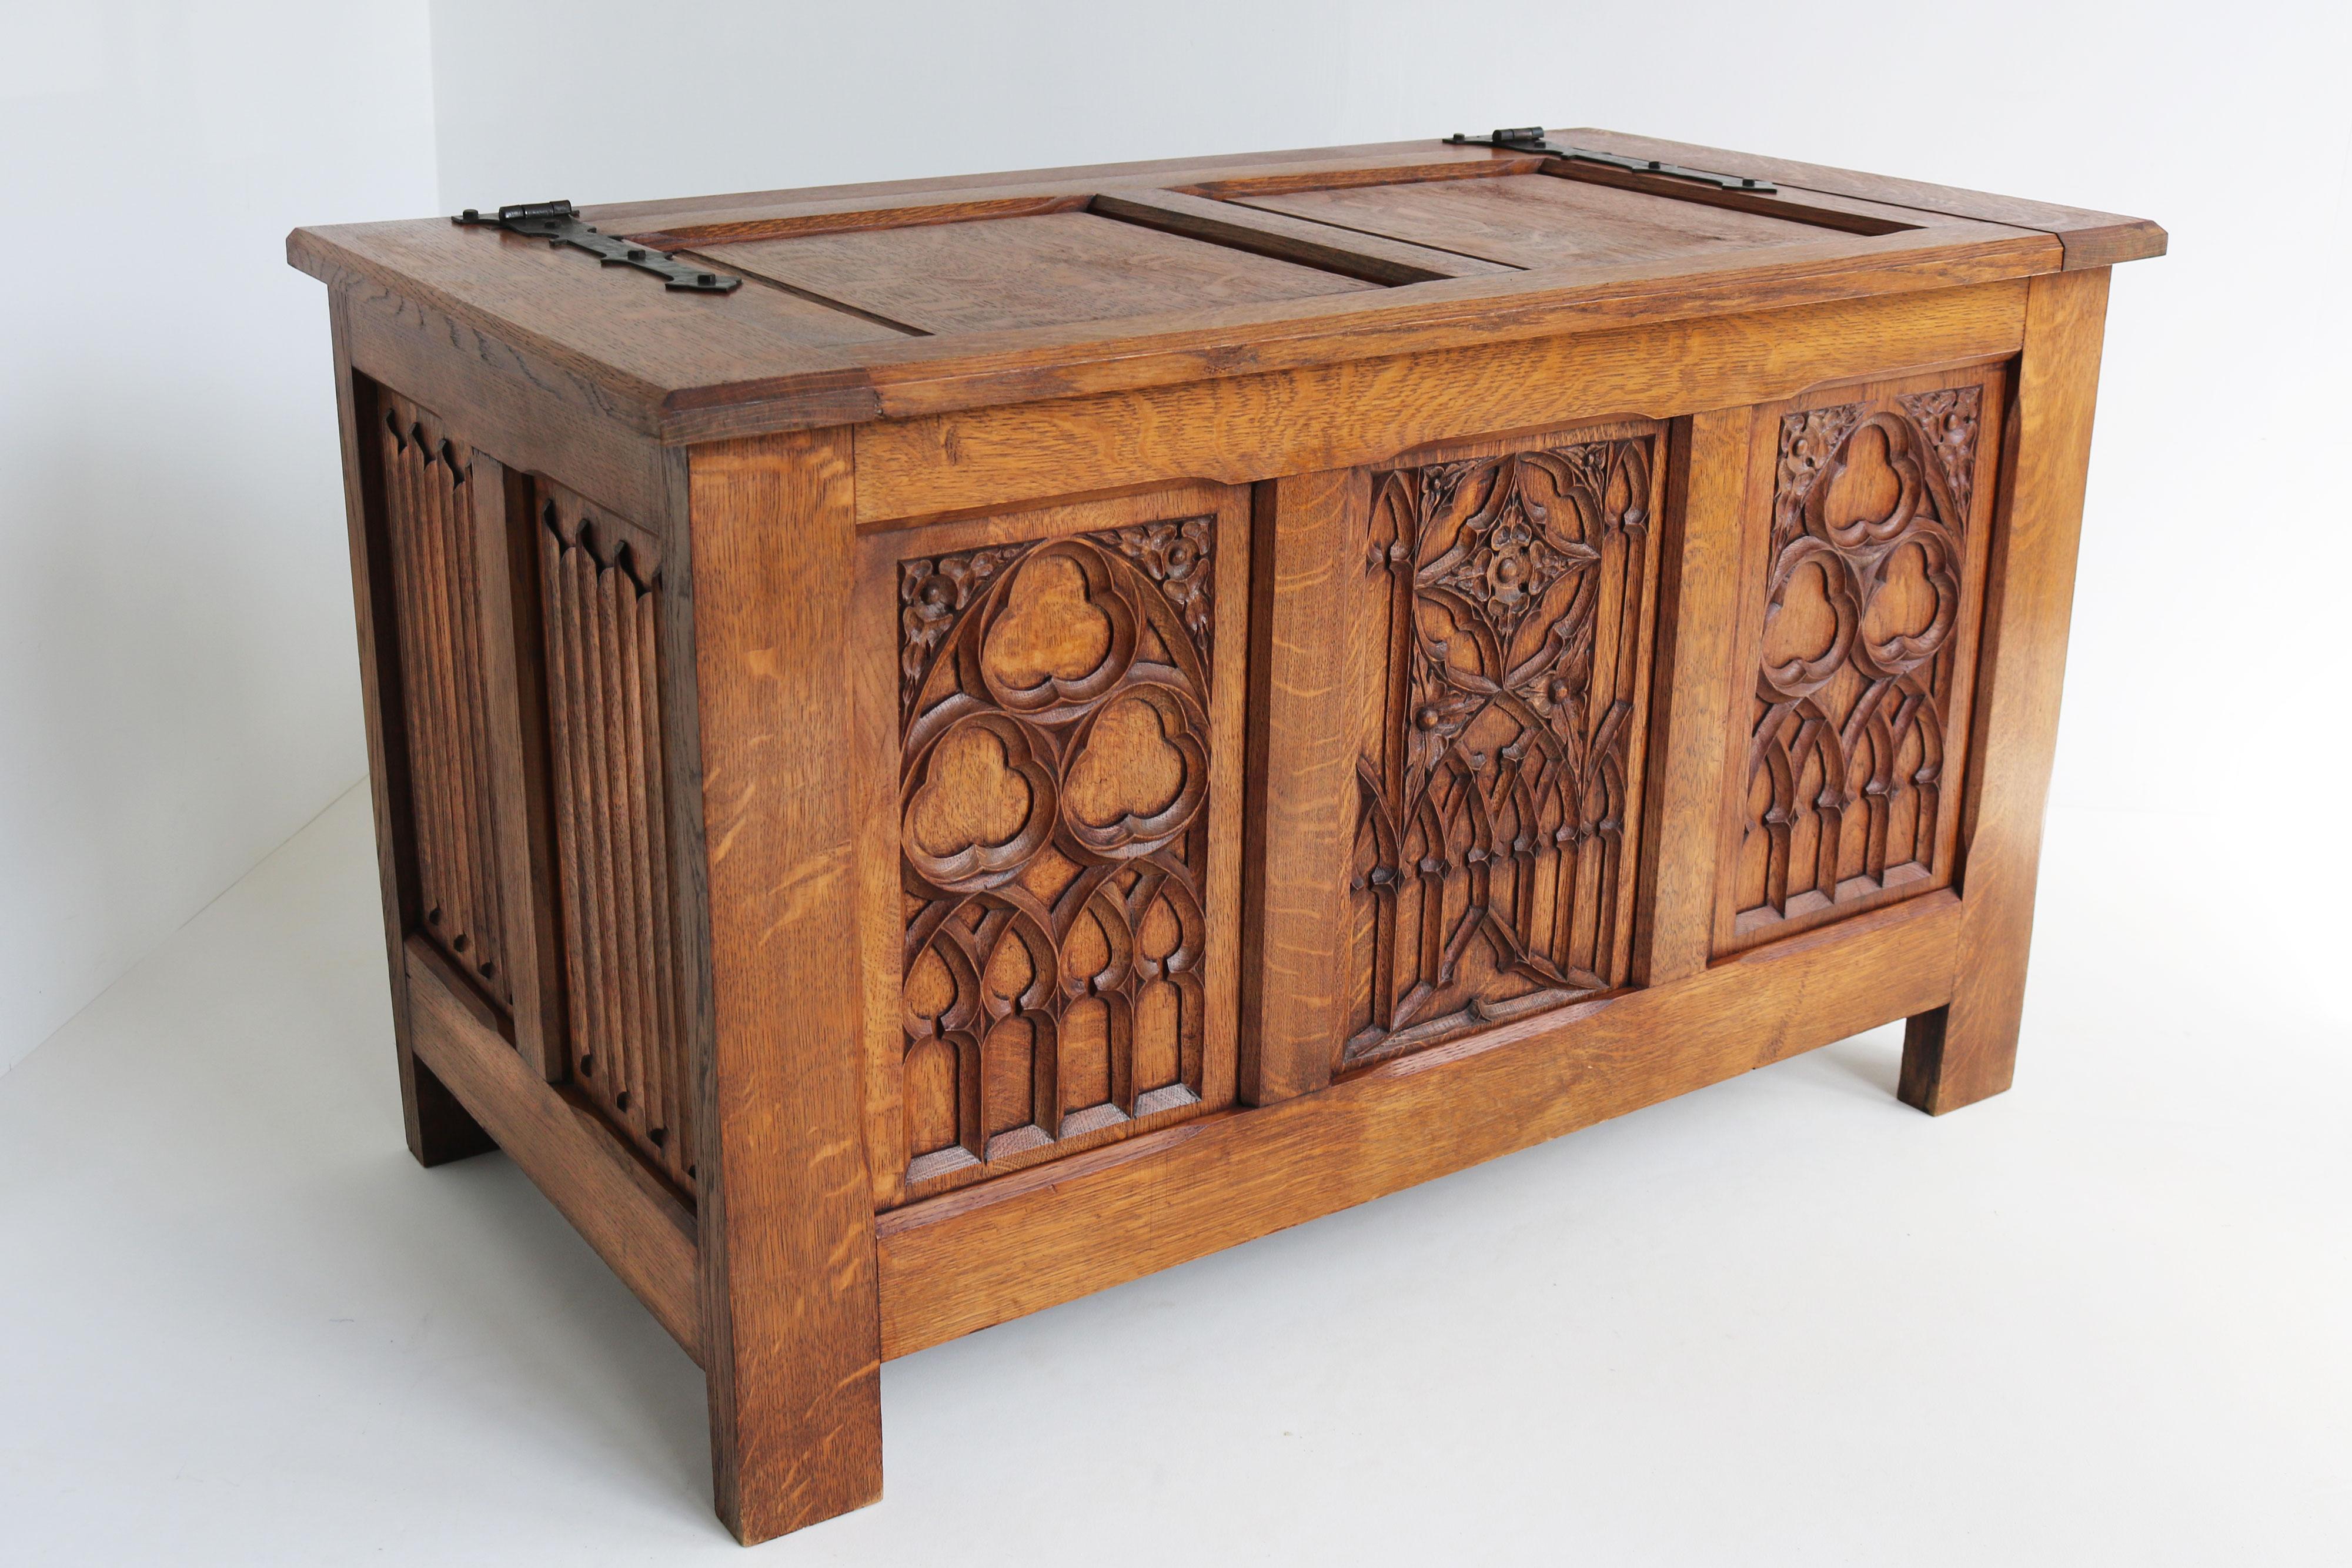 Breathtaking & Practical! This 19th century French Gothic revival blanket chest / chest.  Made out of solid European oak, fully hand carved with much attention to detail & exceptional craftsmanship by a master carver. With gorgeous pair of hand